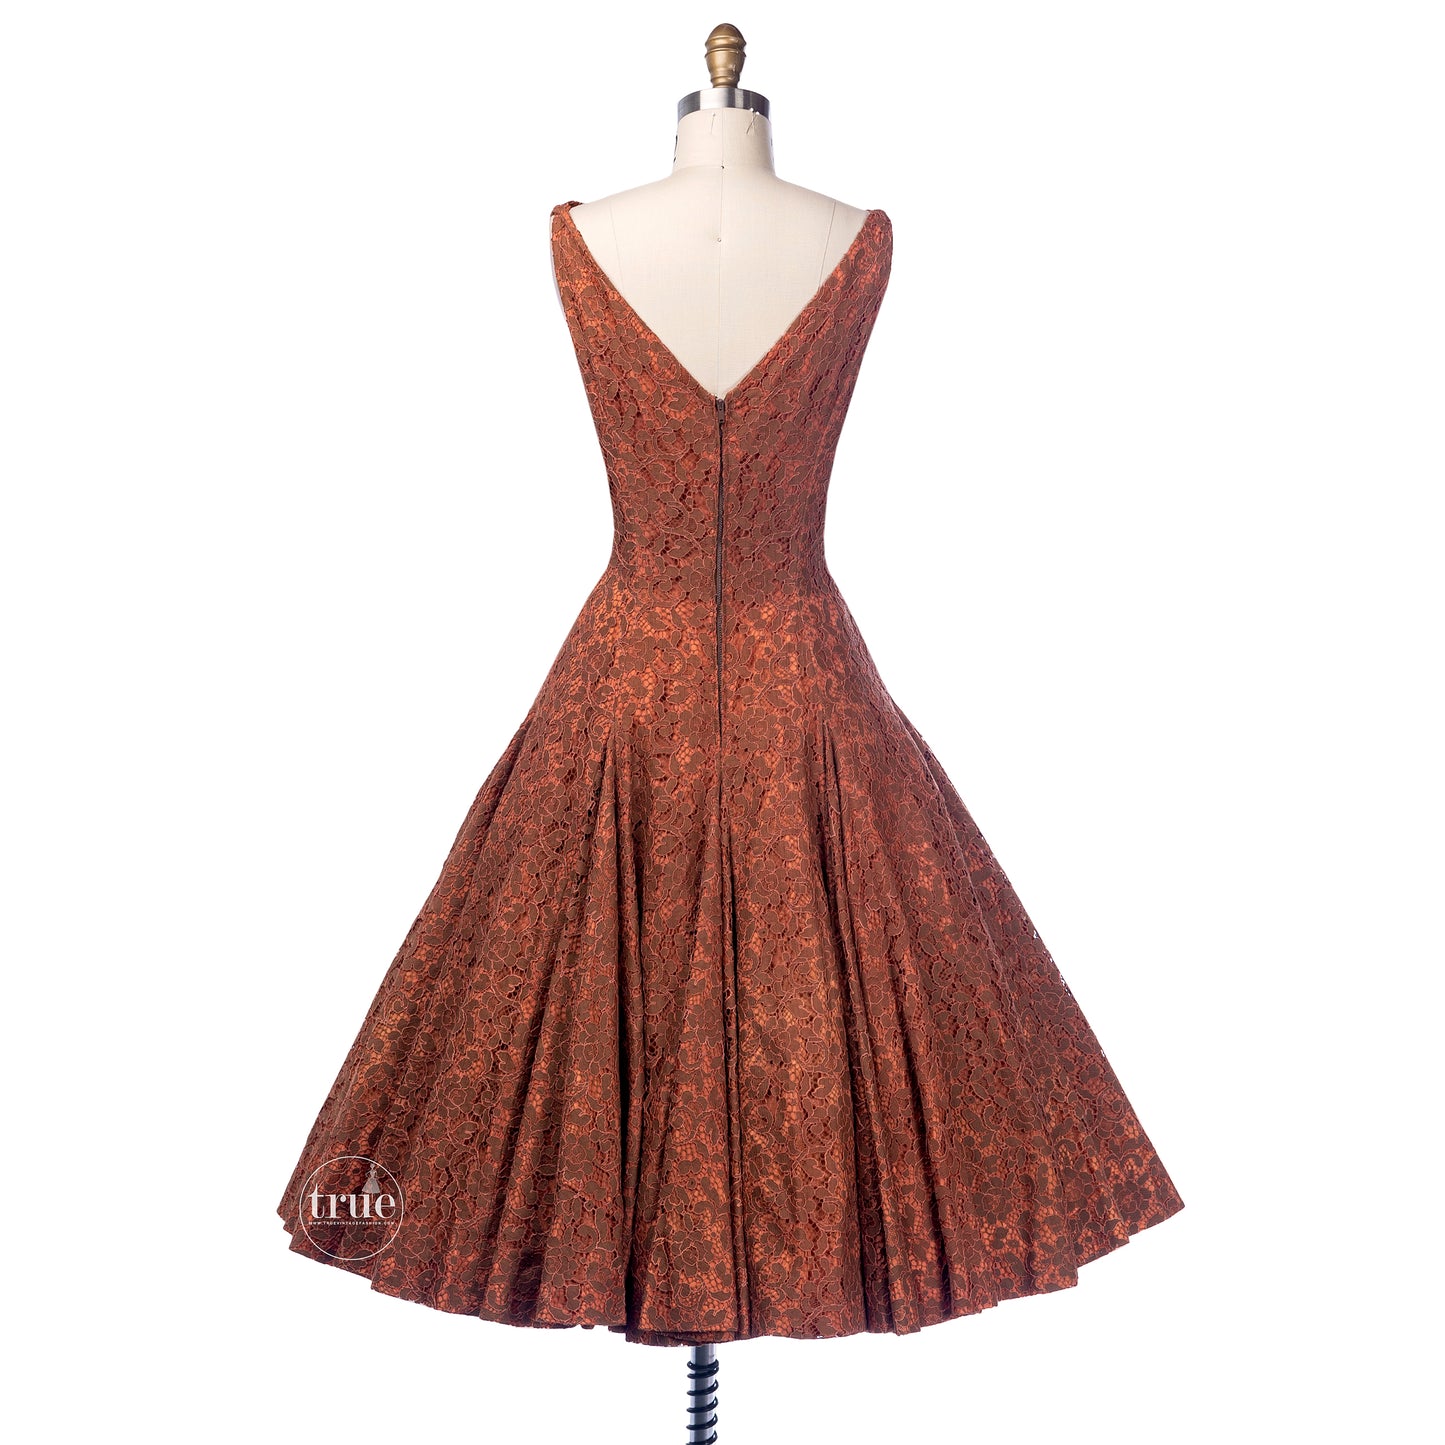 vintage 1940's dress ...decadent needle lace over a golden toasted apricot full circle skirt party dress